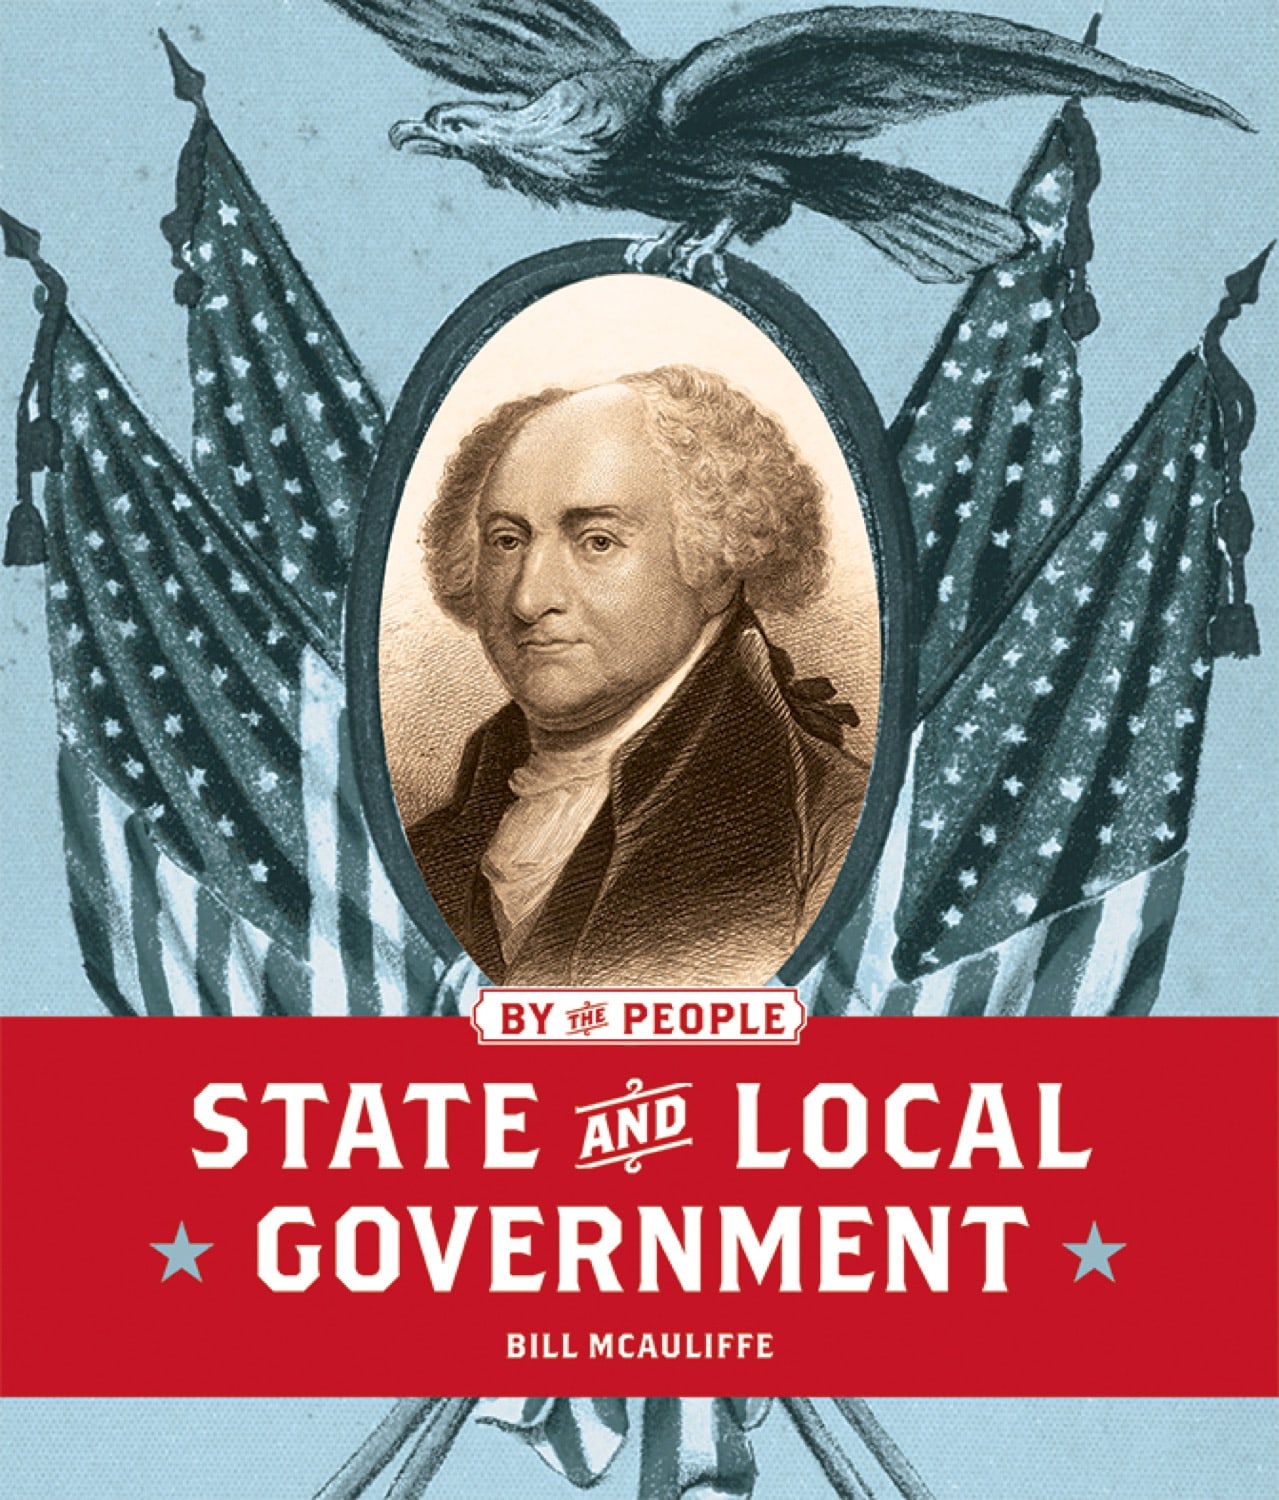 By the People: State and Local Government